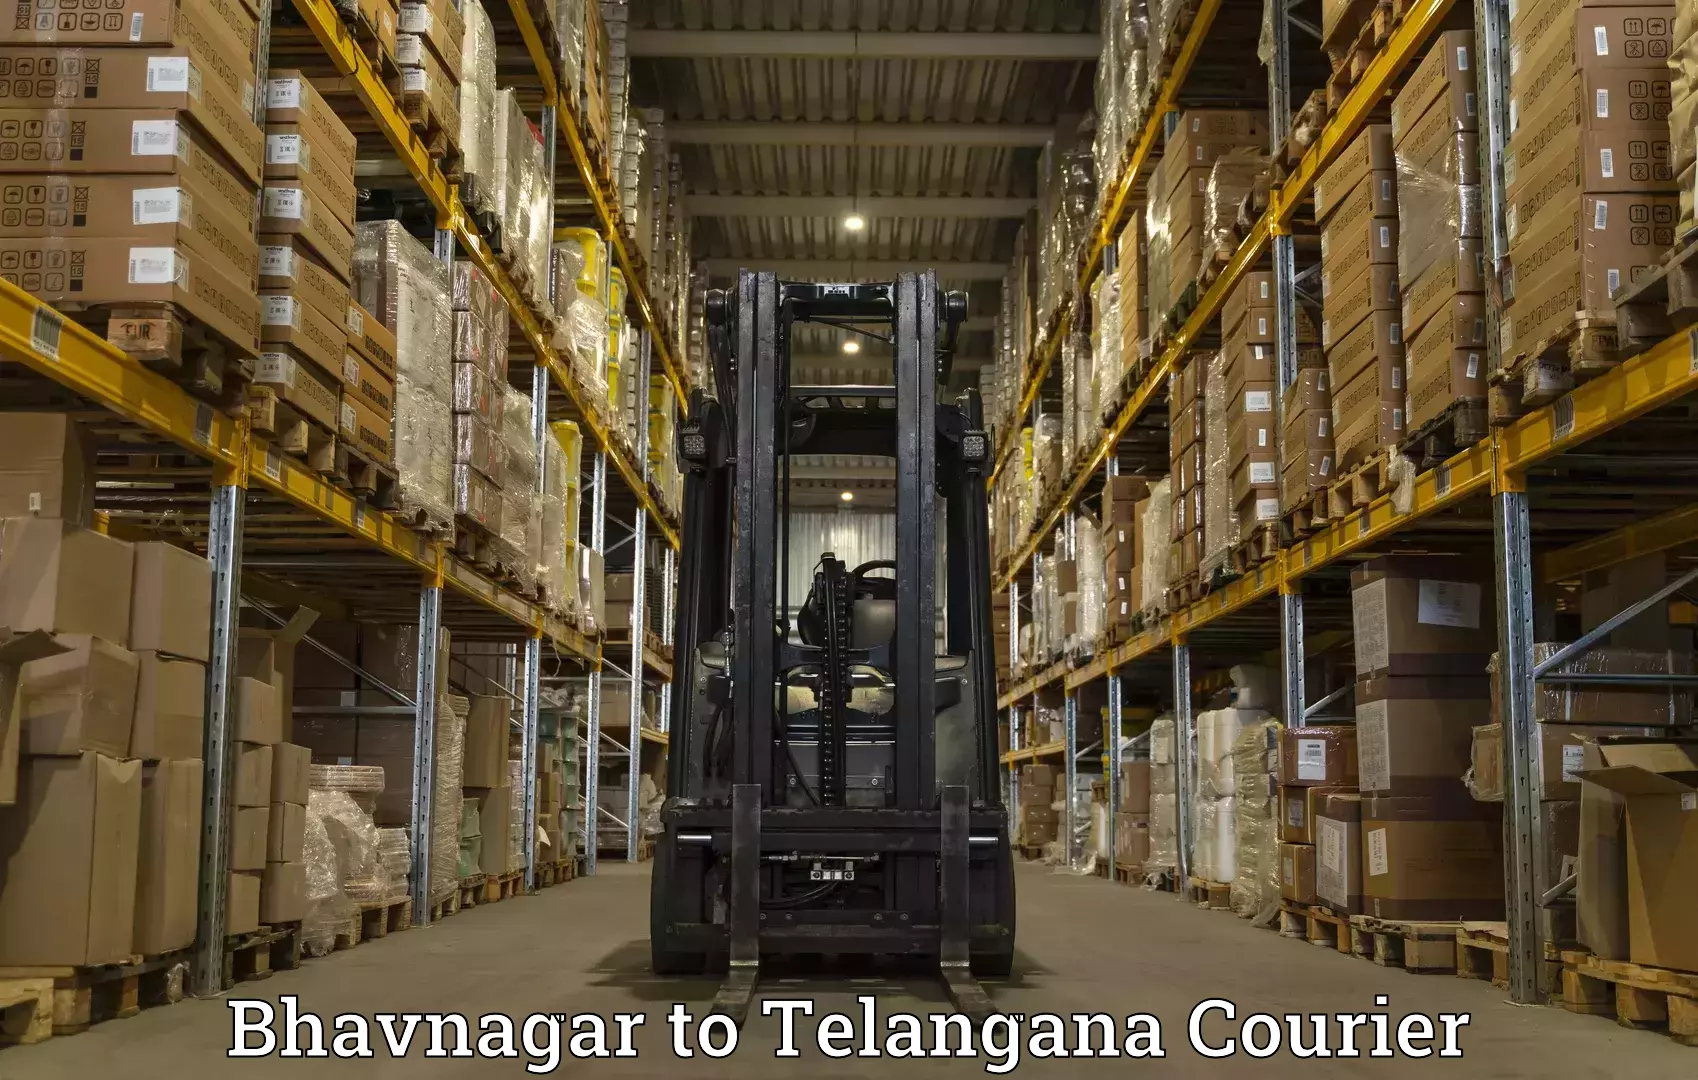 Reliable delivery network Bhavnagar to Telangana